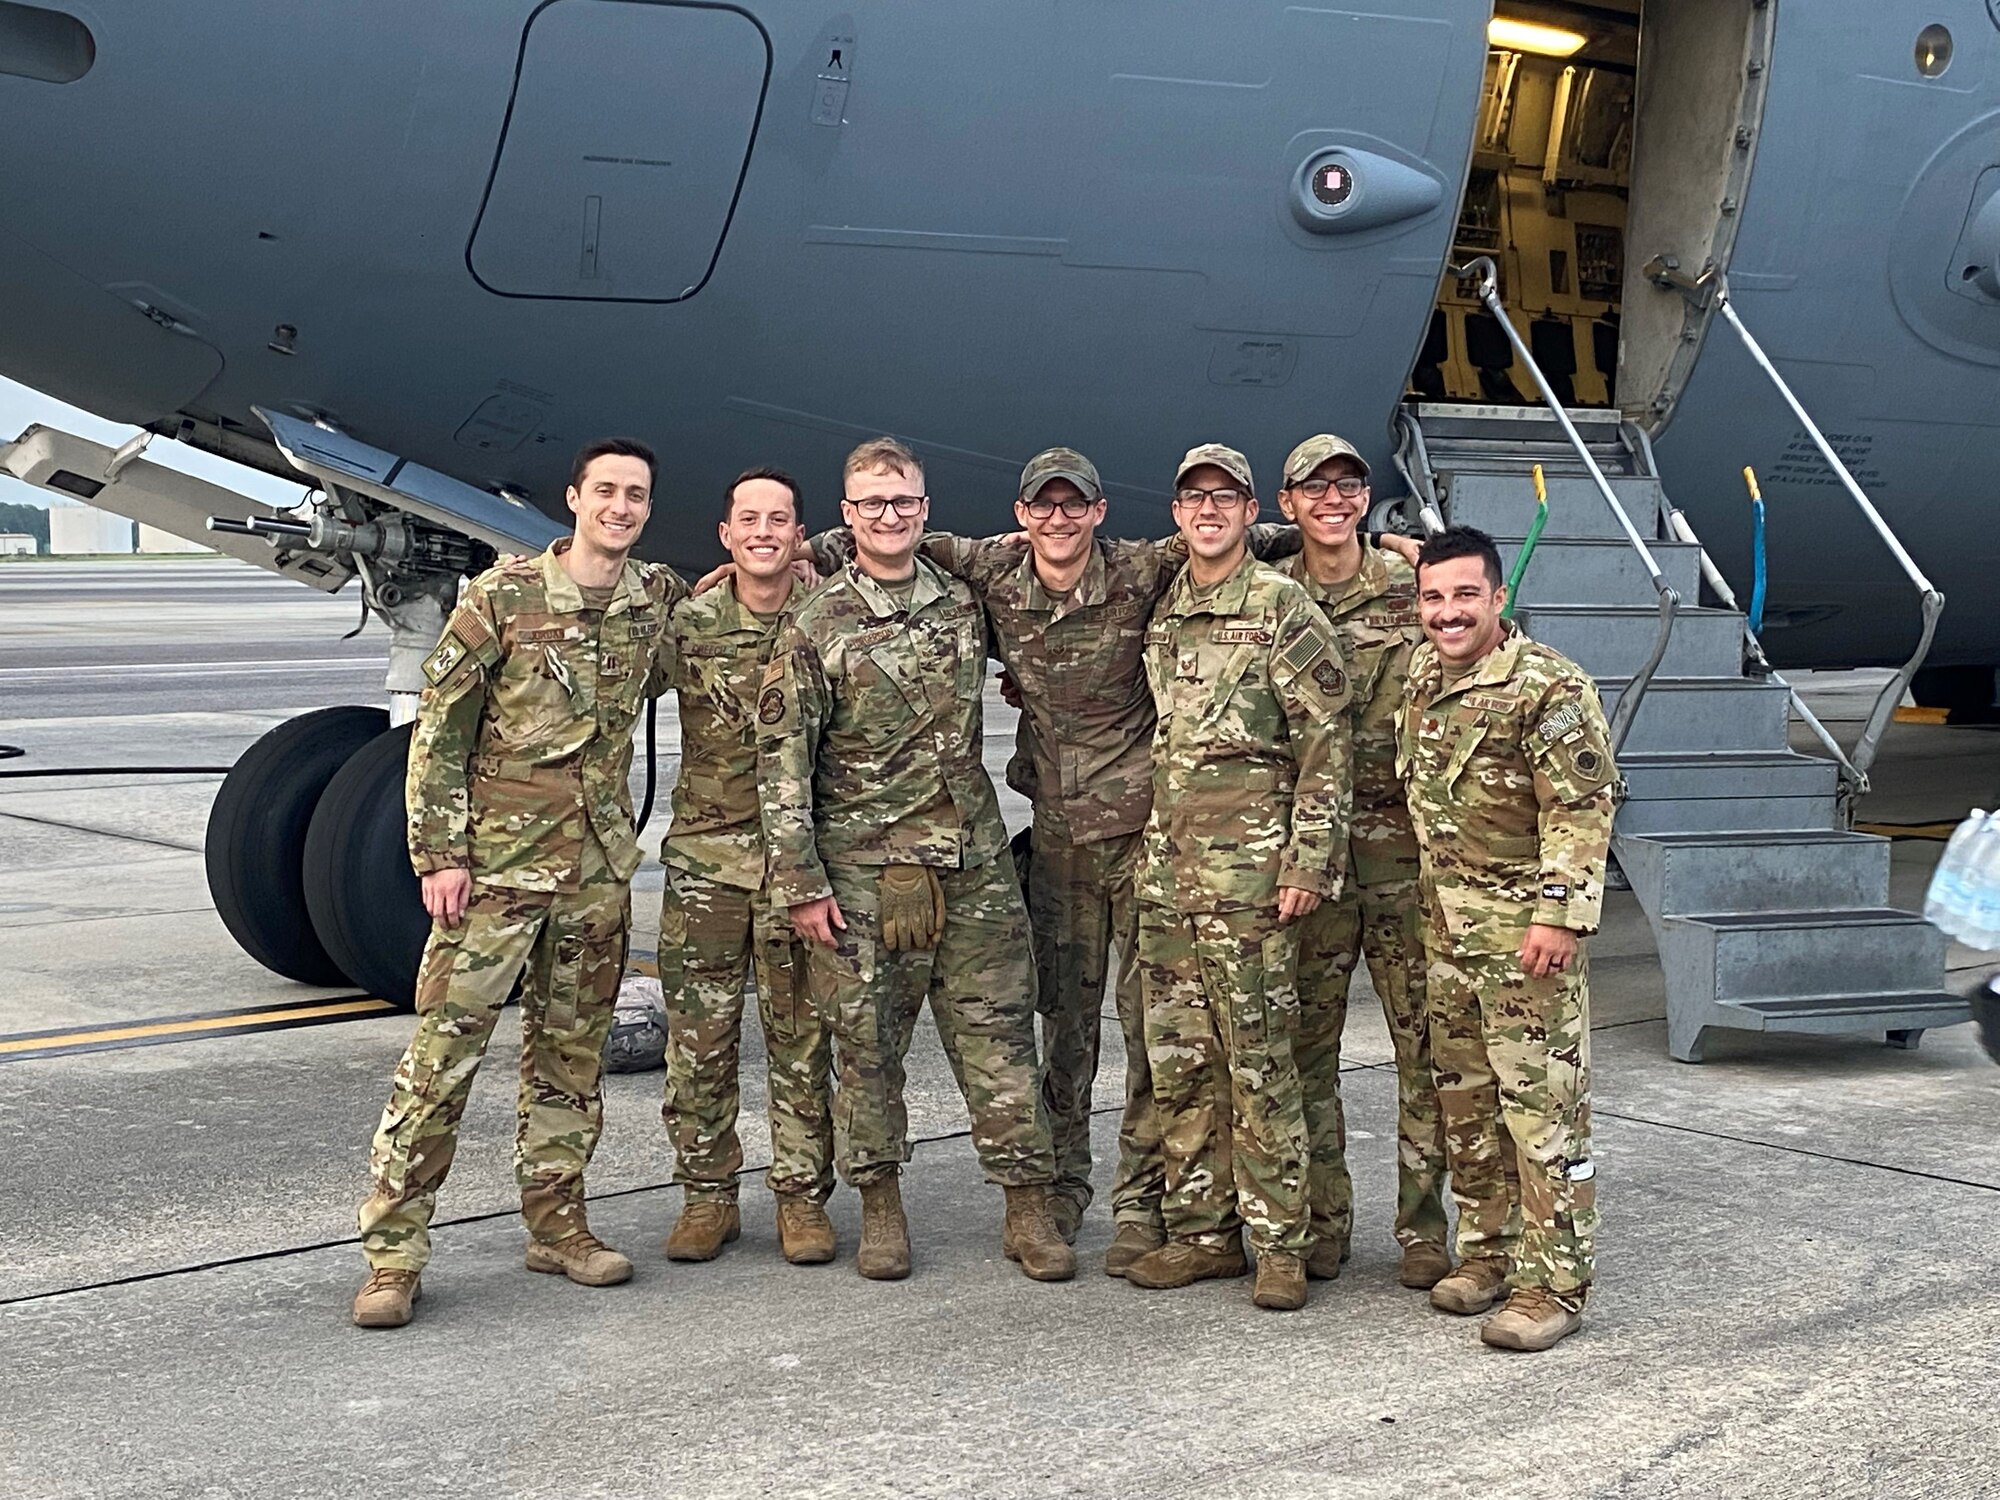 Aircrew from the 3rd Airlift Squadron pose for a group photo in front of a C-17 Globemaster III on Dover Air Force Base, Delaware. The aircrew received the Lt. Gen. William H. Tunner award for their efforts during Operation Allies Refuges in 2021. (U.S. Air Force courtesy photo)